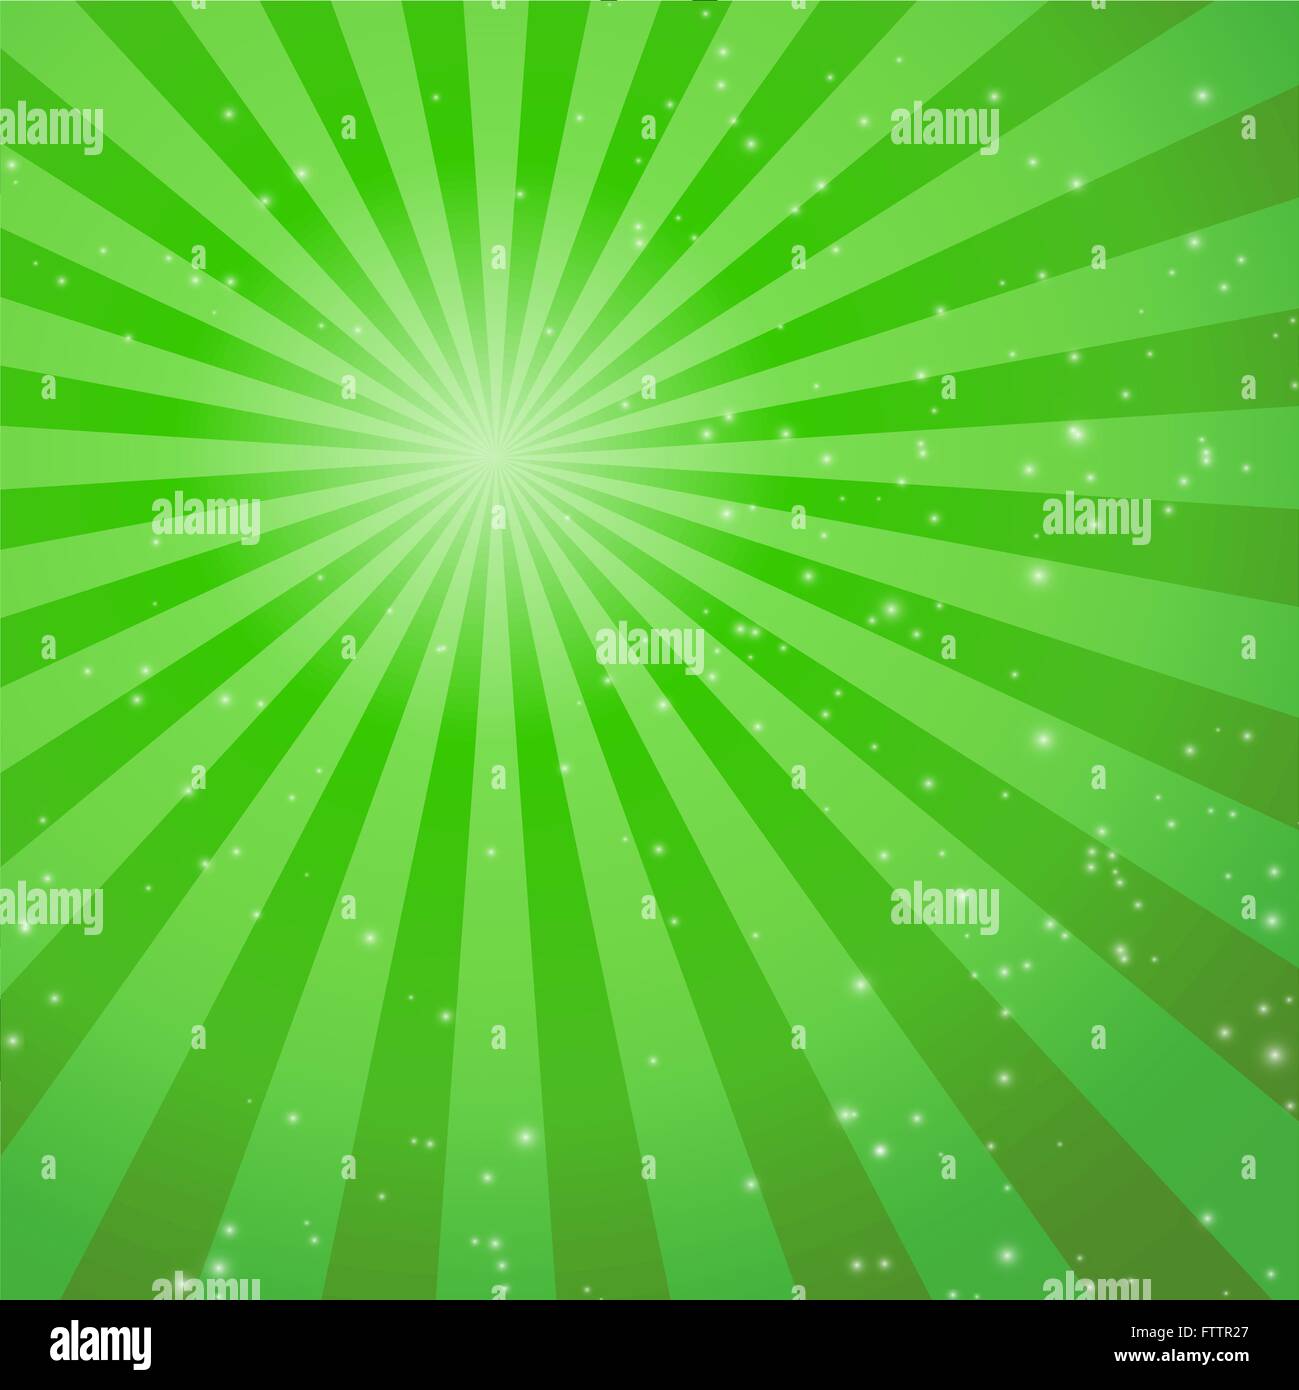 Green abstract background with rays. Vector Stock Vector